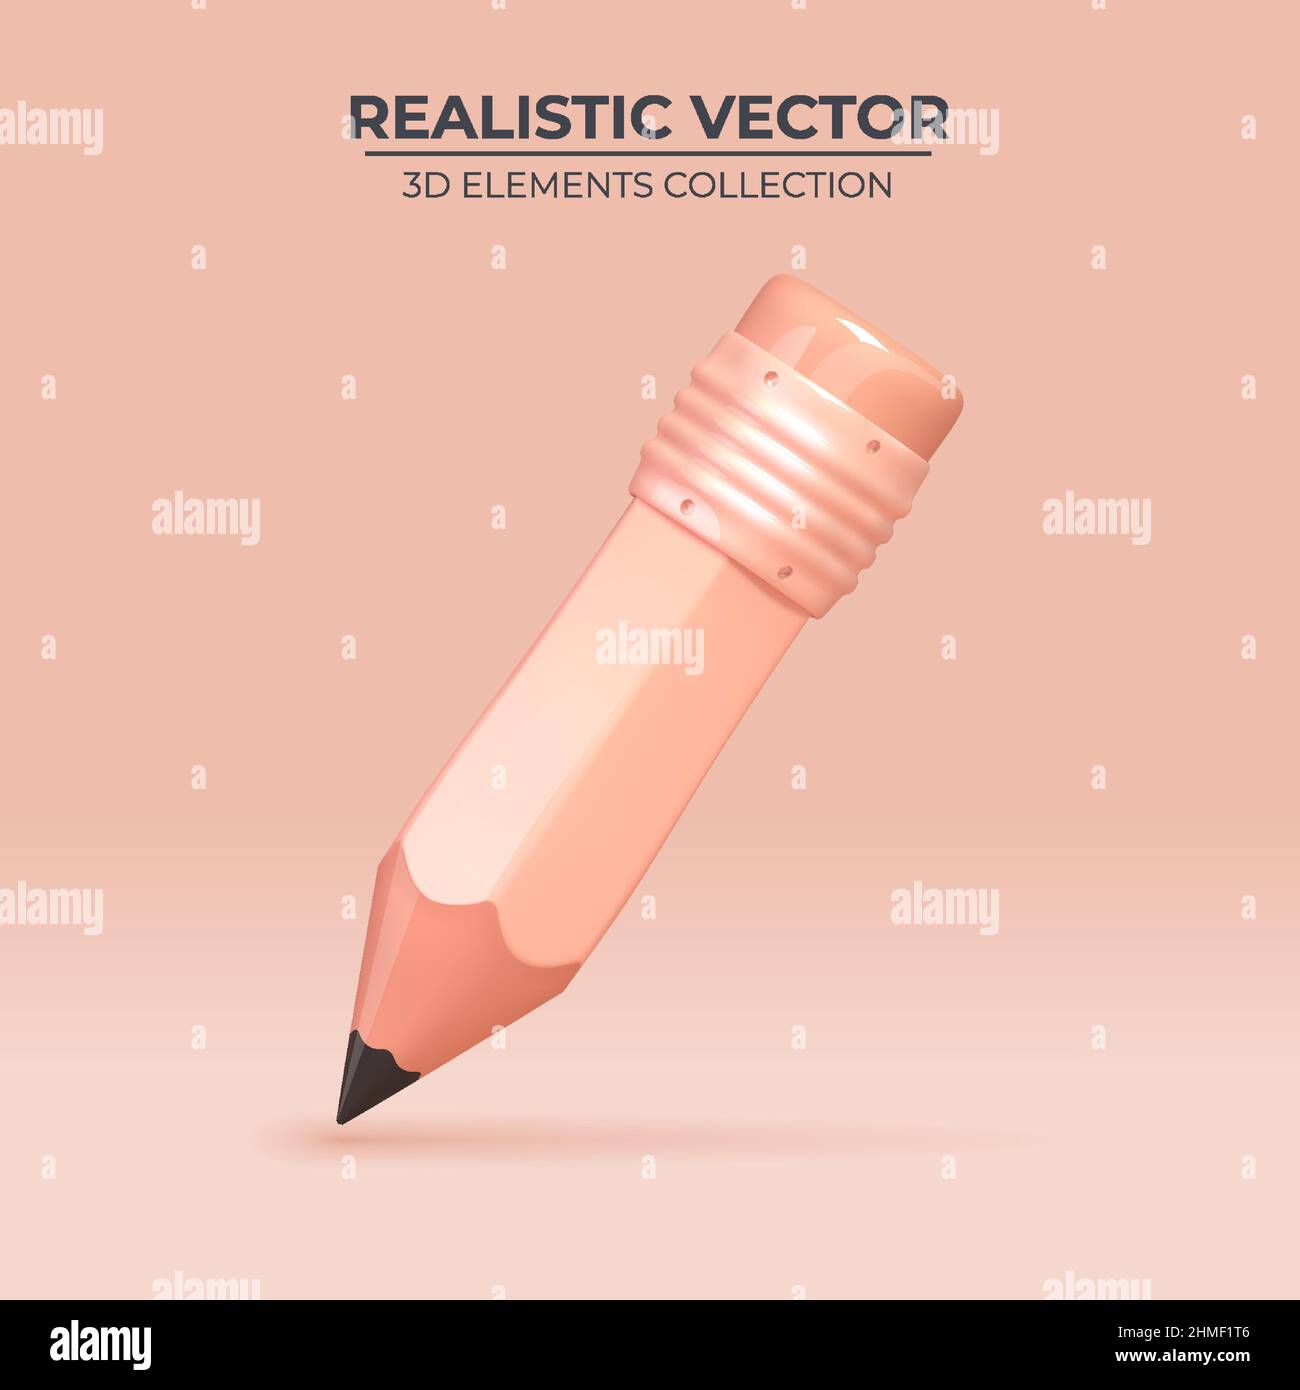 3d vector realistic pencil with rubber eraser. Sharpened detailed office mockup in Trendy colors, school instrument, creativity, idea, education and design symbol. Isolated illustration Stock Vector